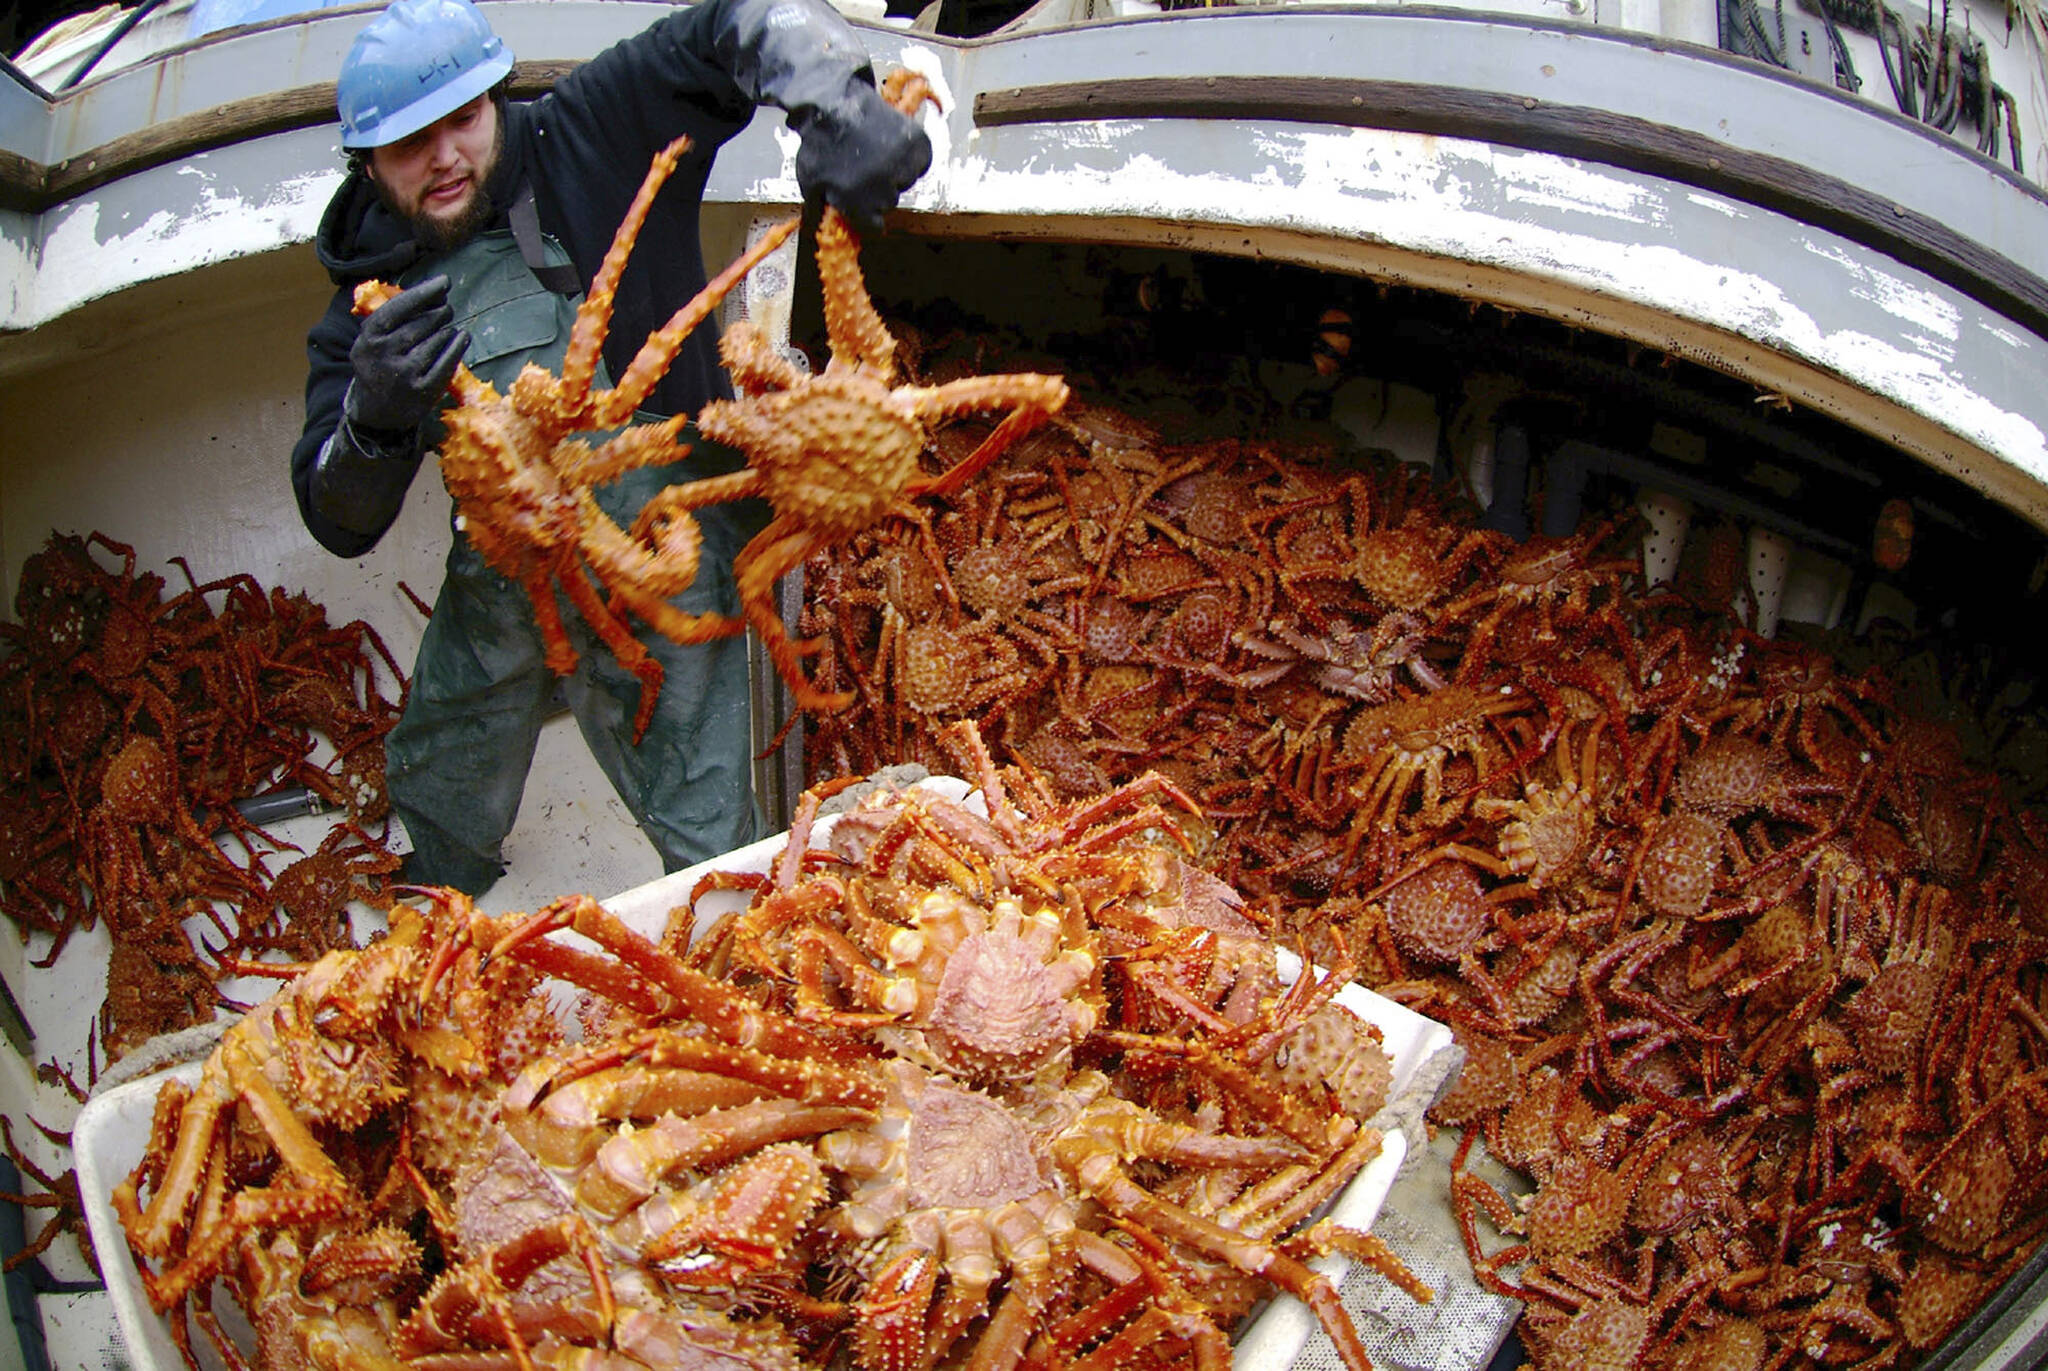 Steve Waddle places golden king crab into a tote in the hold of the F/V Angjenl while unloading at Petersburg, Alaska on March 1, 2007. The U.S. Department of Commerce’s disaster declaration for salmon and crab fisheries in Washington and Alaska opens the door for financial relief as part of an omnibus spending bill being negotiated by U.S. lawmakers. The declaration Friday, Dec. 16, 2022, covers Bristol Bay king crab harvests suspended for two years, and the snow crab harvest that will be canceled for the first time in 2023. (AP Photo / Klas Stolpe)